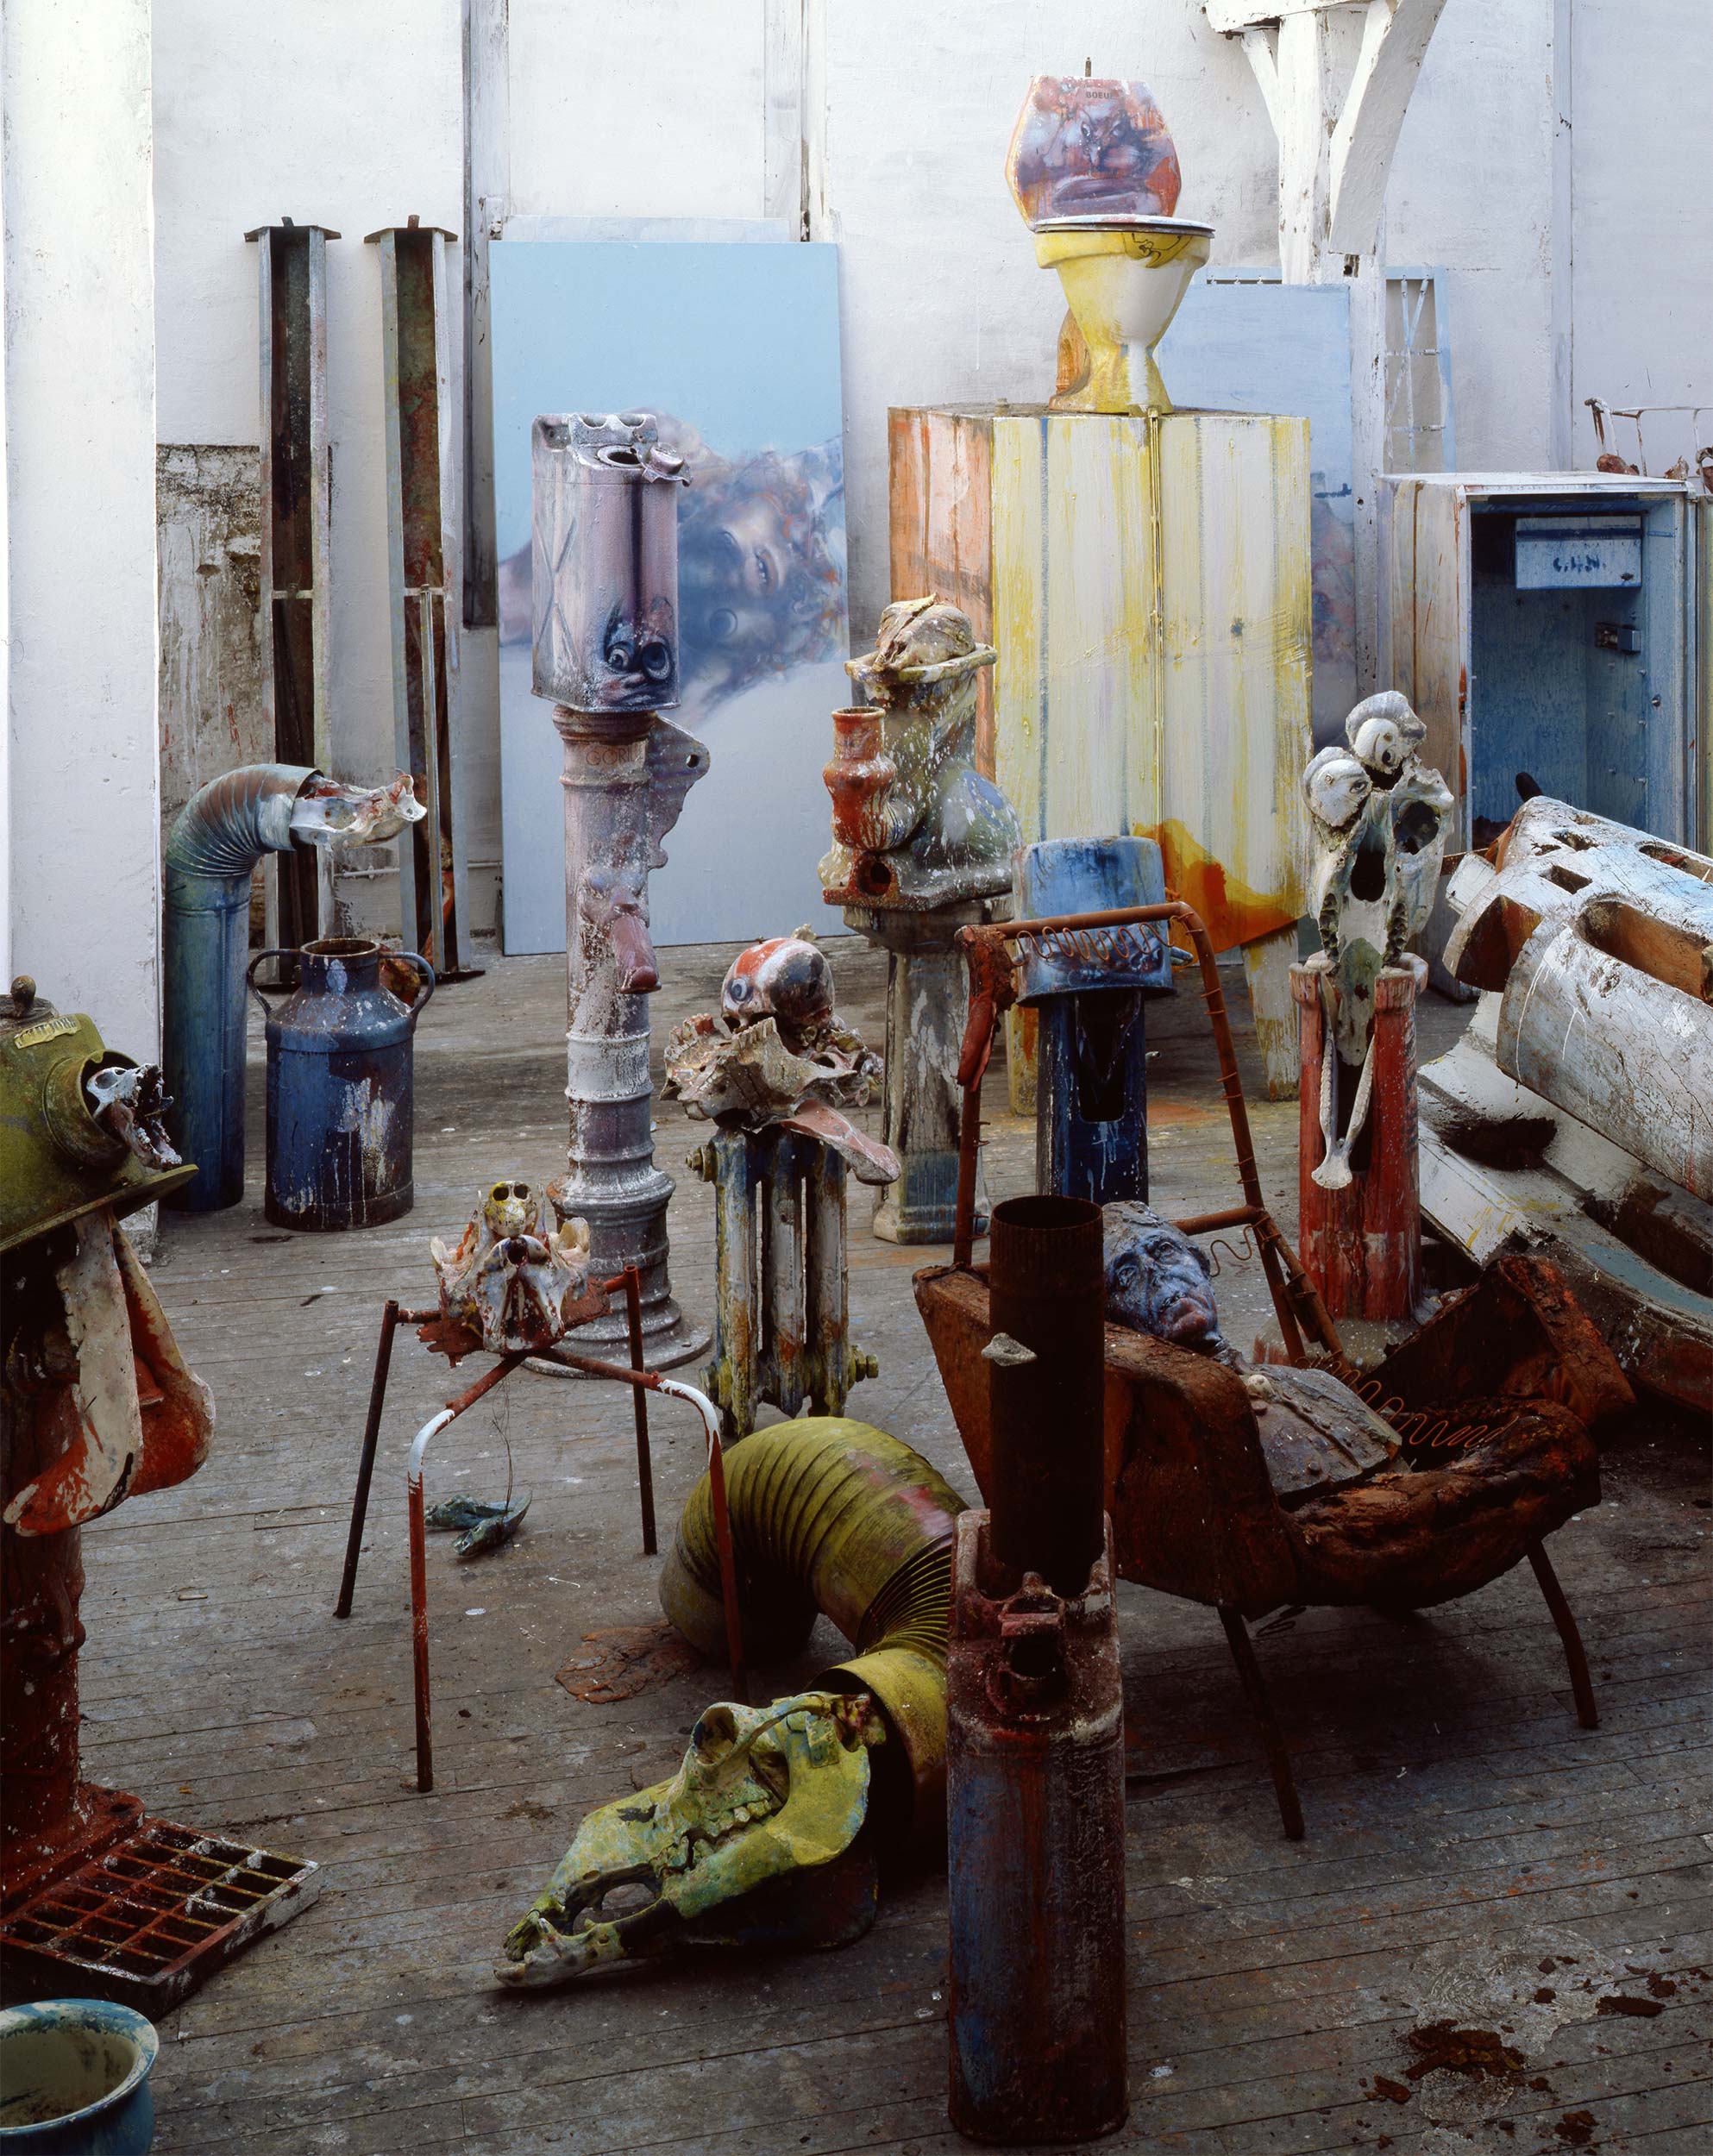 Sculpture in the studio at Hérouval in 1990